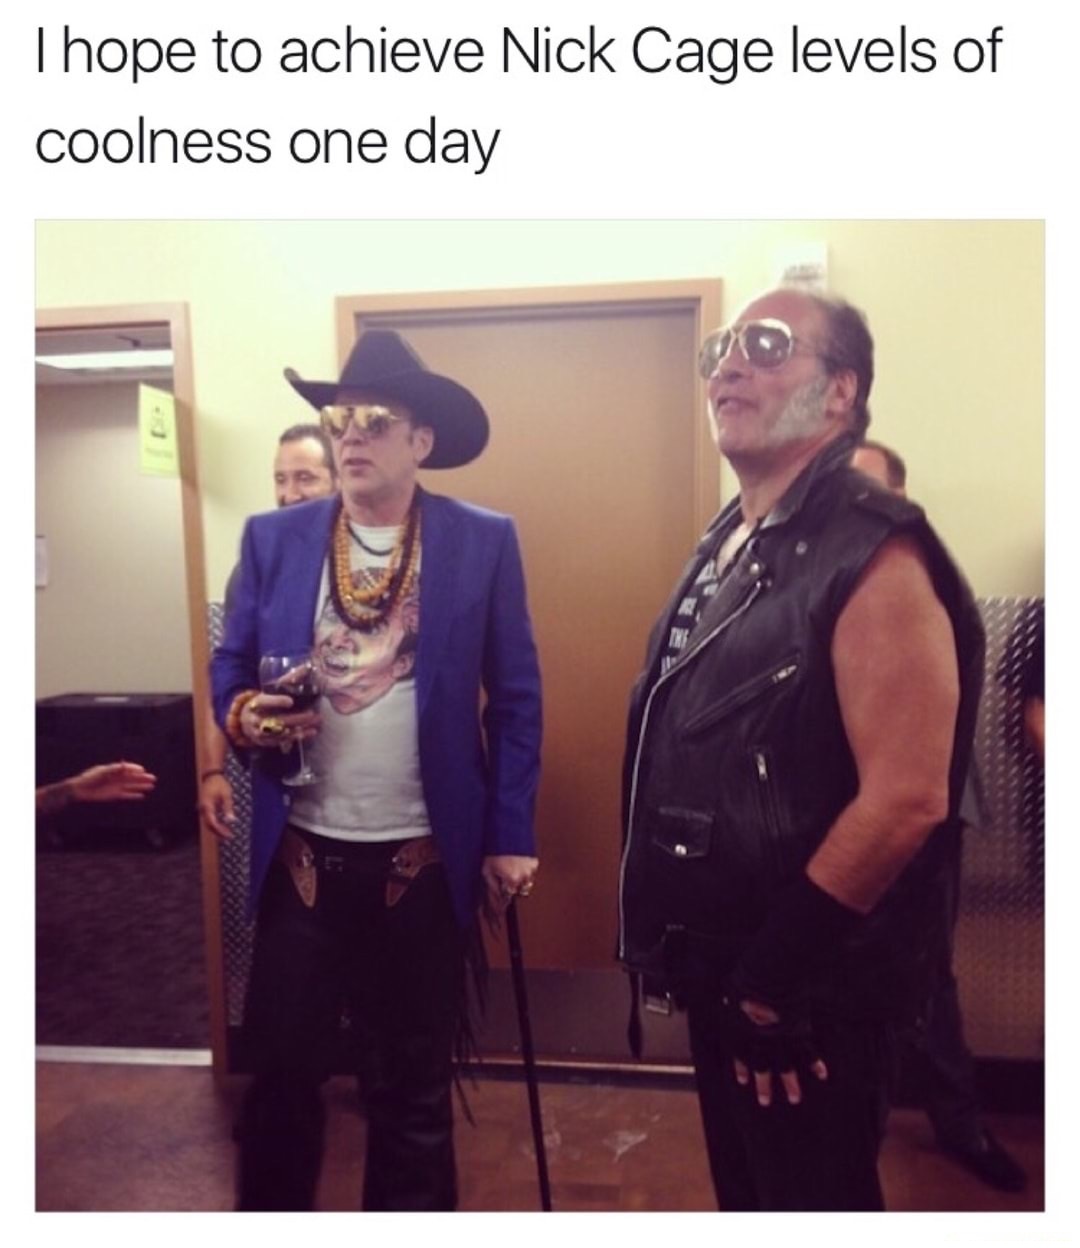 nicolas cage guns n roses - Thope to achieve Nick Cage levels of coolness one day